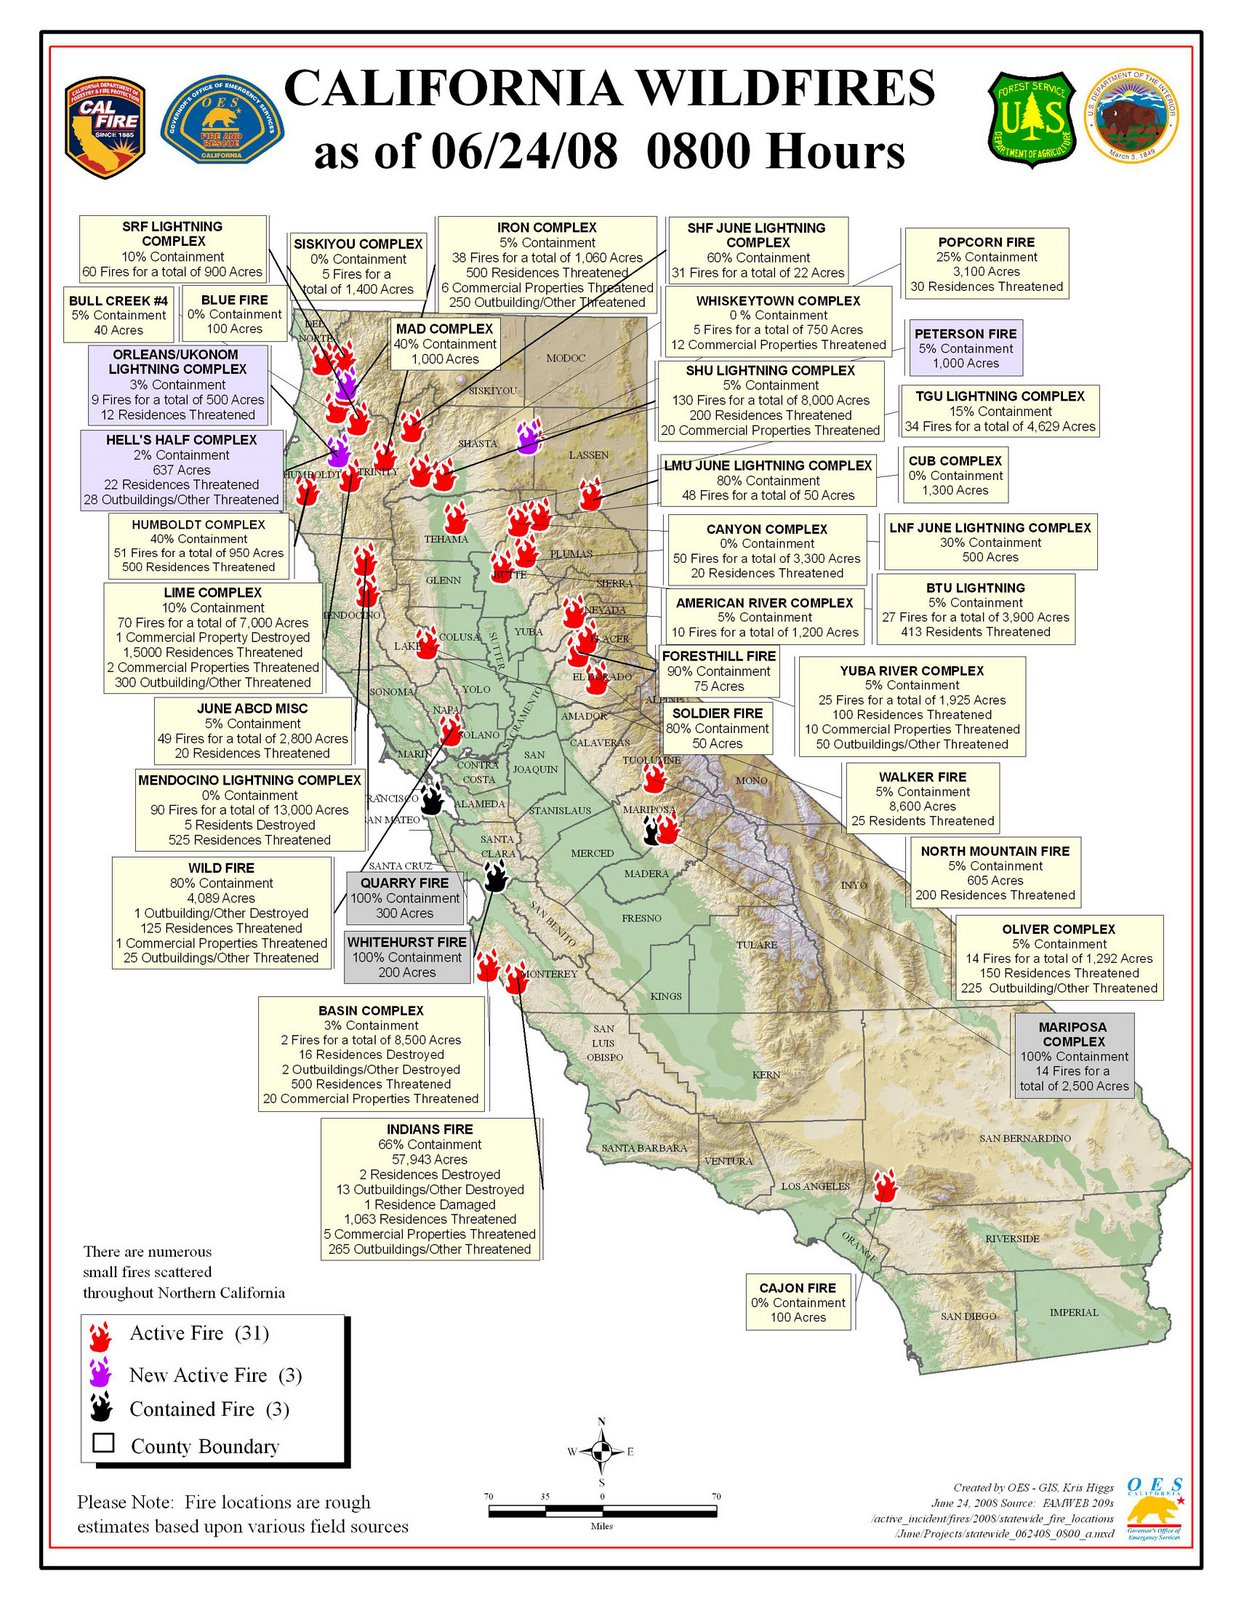 Fire Southern California Map - Klipy - California Department Of Forestry And Fire Protection Map